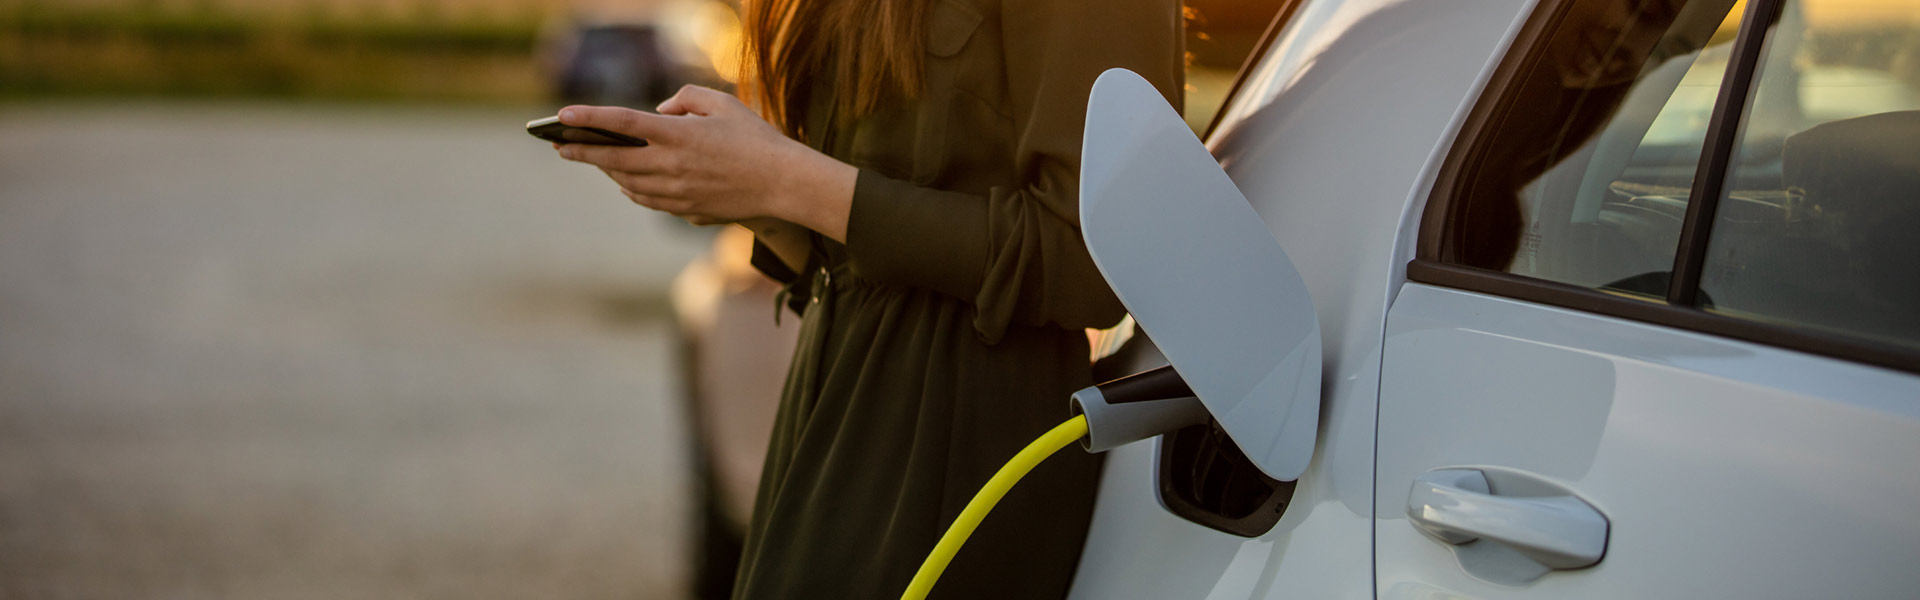 SAP Introduces E-Mobility Solution for Electric Vehicle Fleet